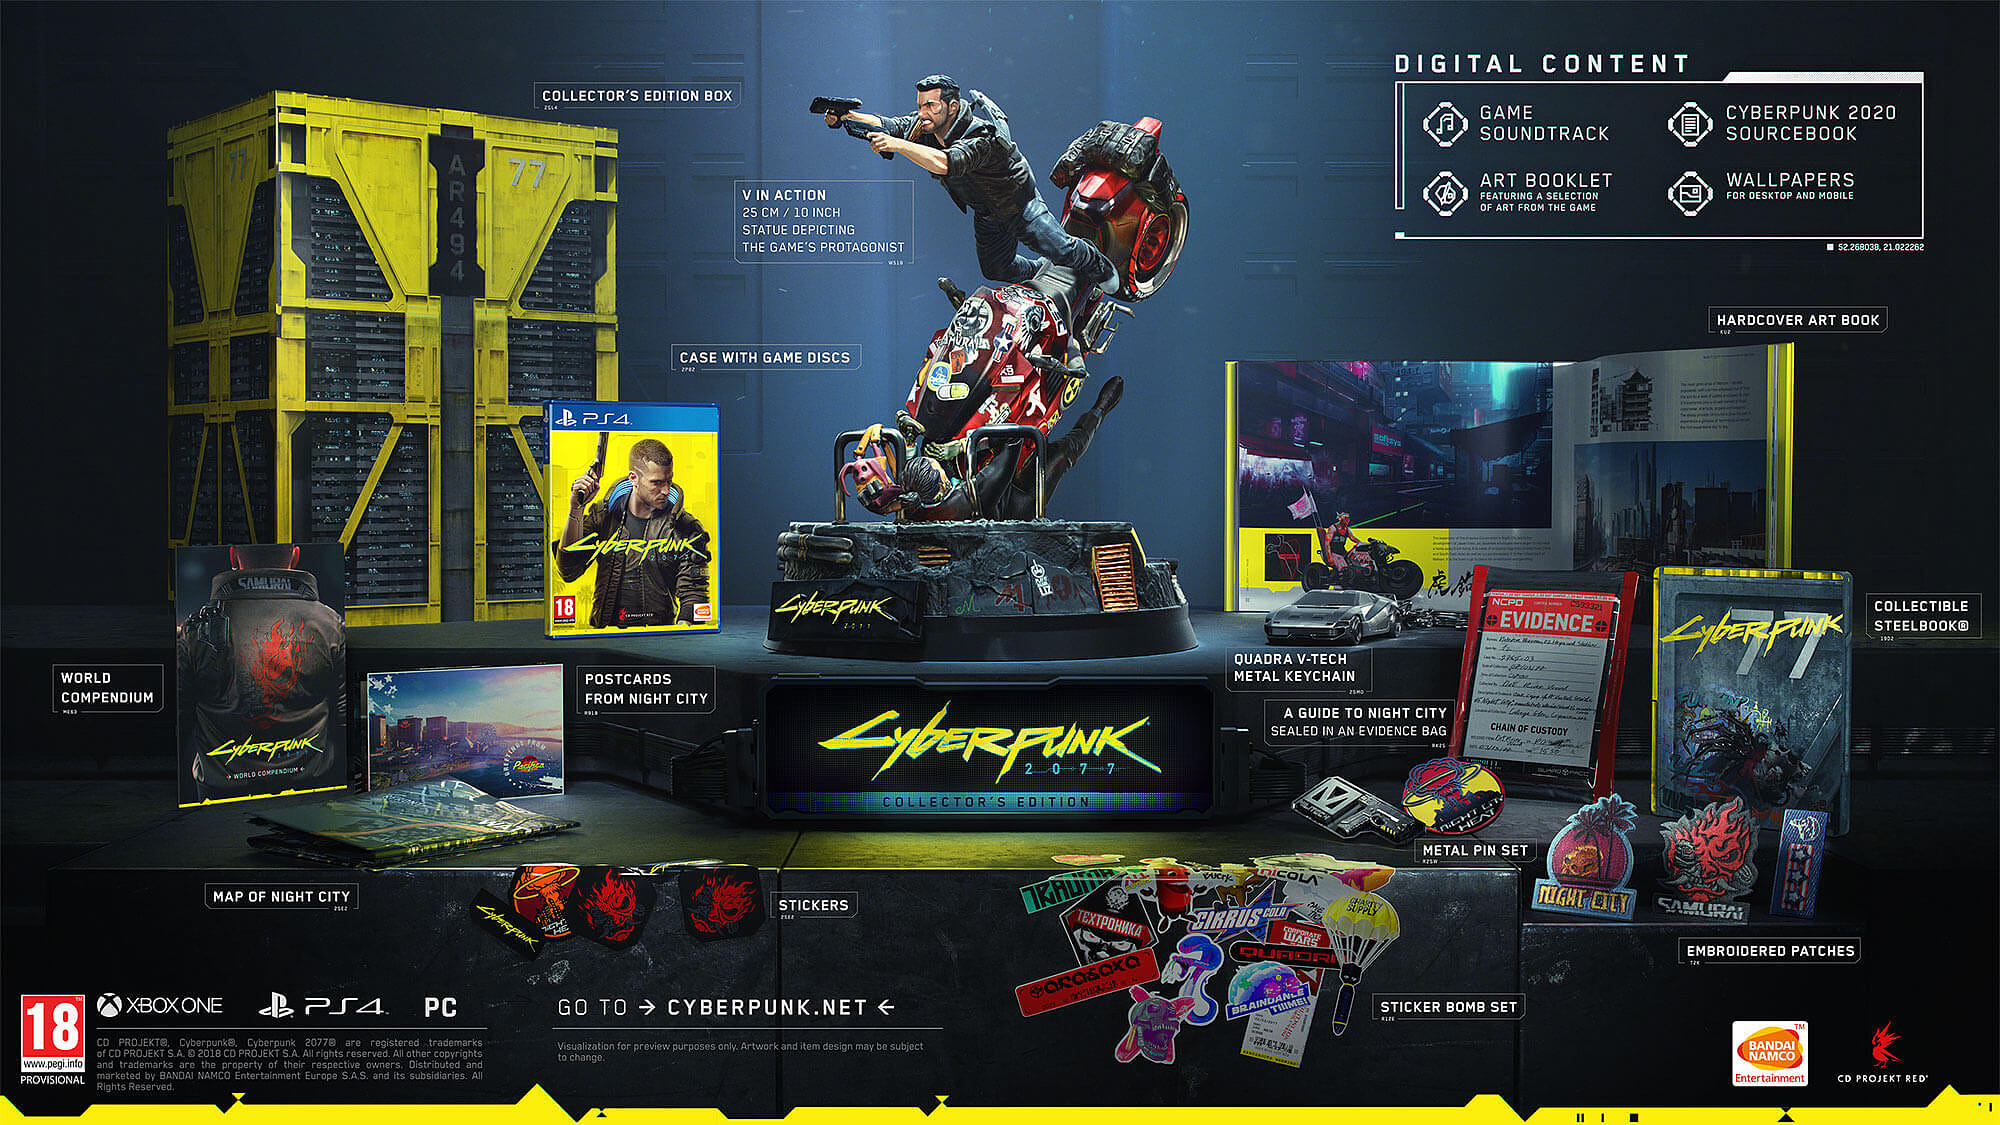 Cyberpunk 2077 - Collector's Edition (PS4), CD Projekt RED